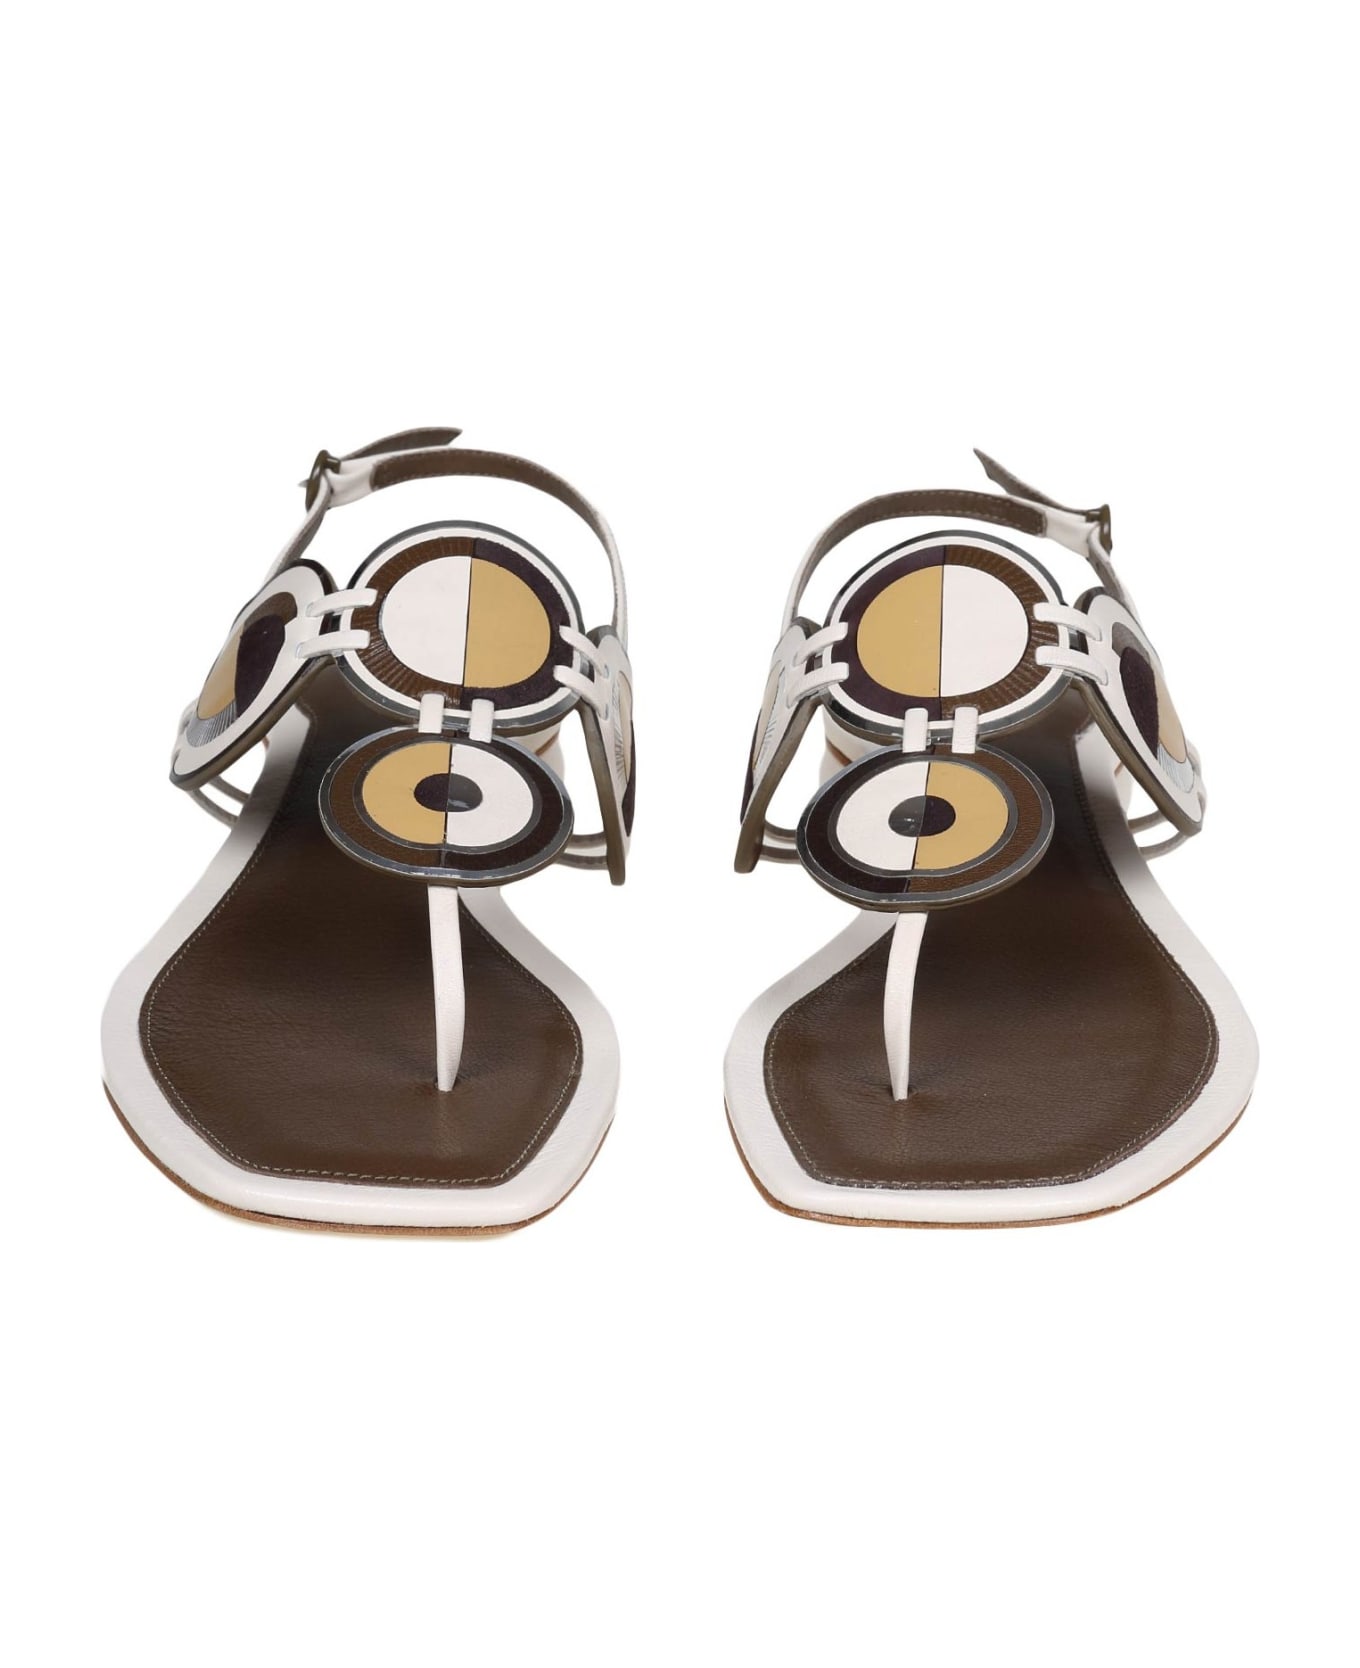 Tory Burch Leather Thong Sandal With Applied Discs - Cream